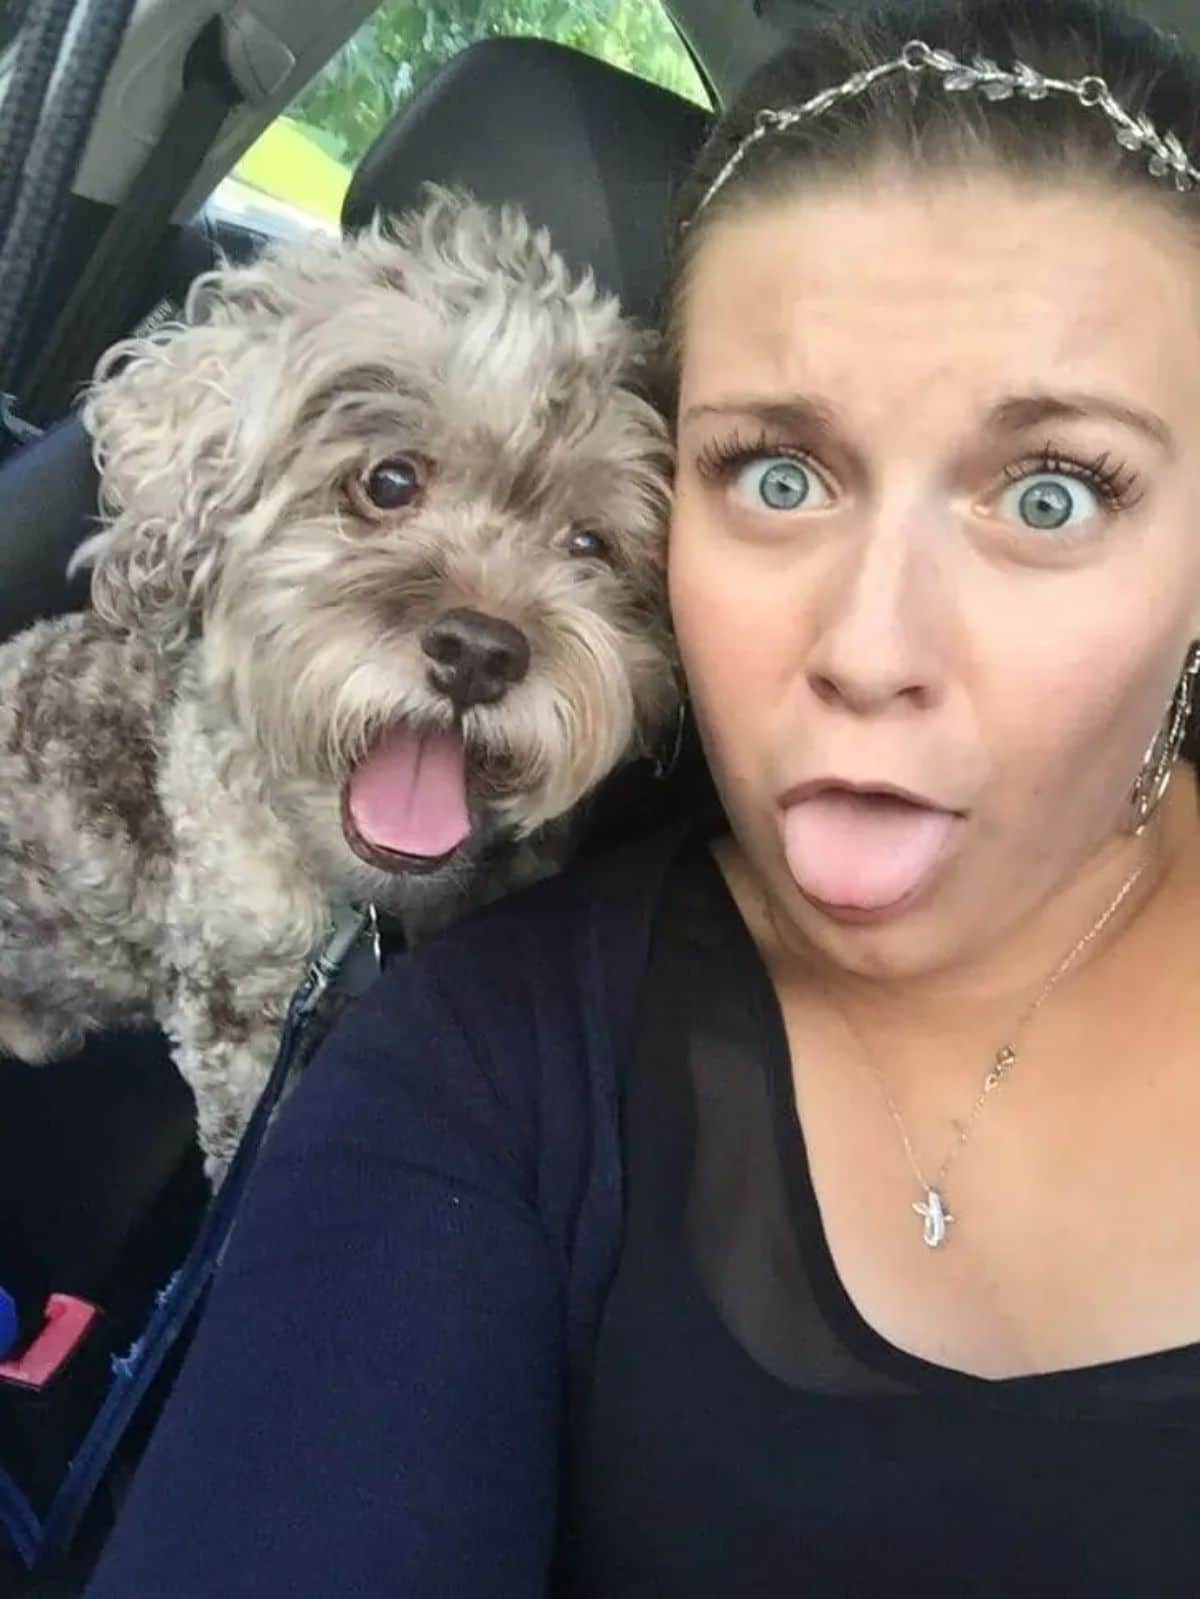 grey and black fluffy dog in a car with the mouth open next to a woman with the mouth open